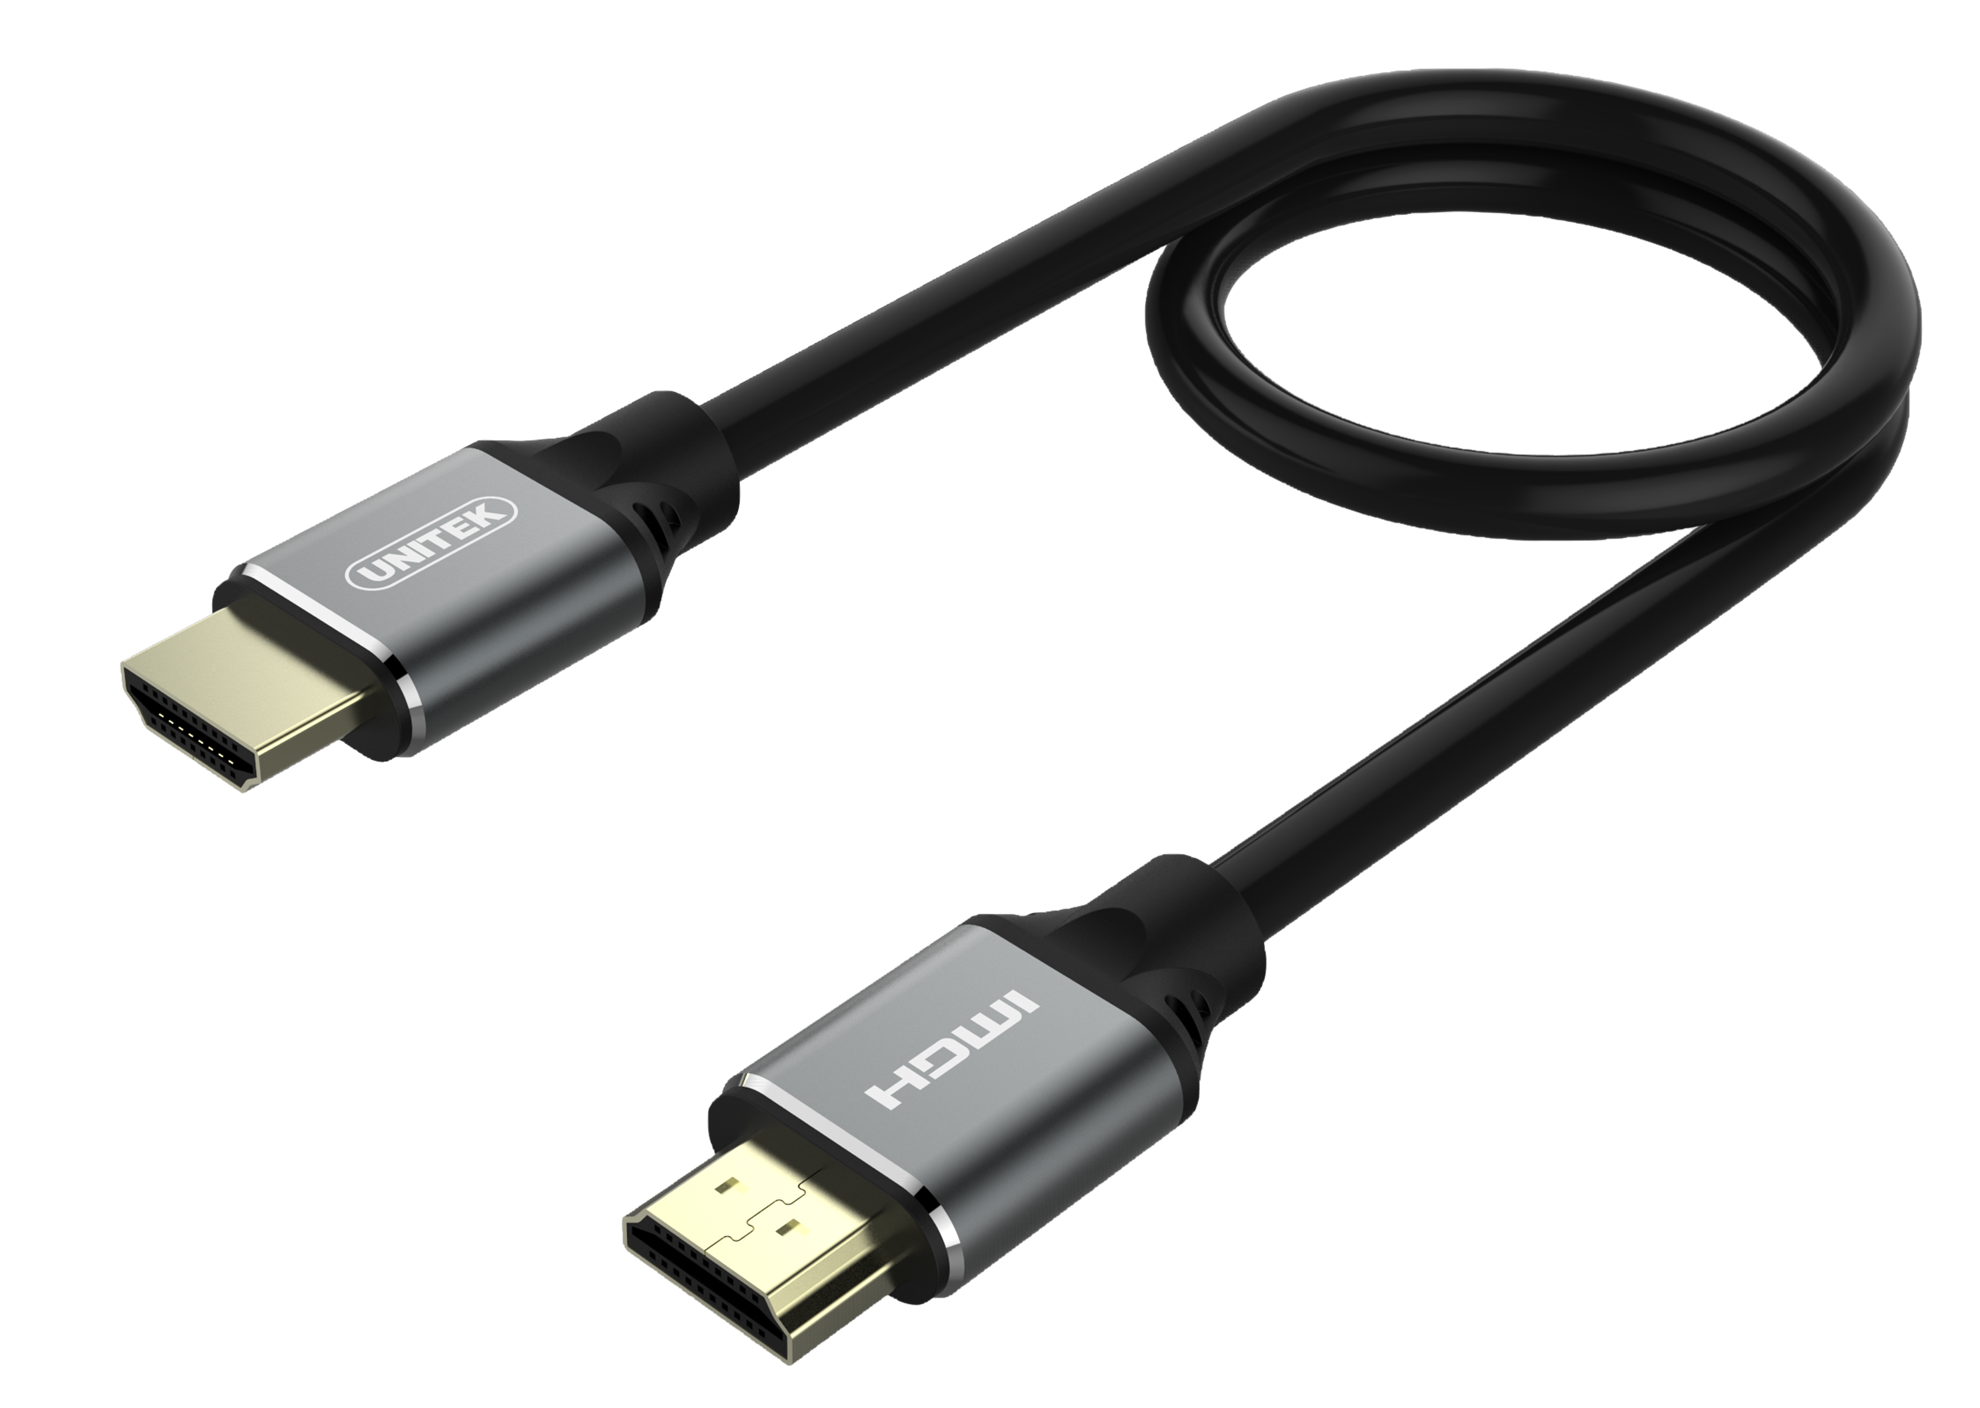 UNITEK_2m_HDMI_2.1_Full_UHD_Cable._Supports_up_to_8K._Max._Res_7680x4320@60Hz_&_4K@120Hz._Supports_Dynamic_HDR,_Dolby_Vision_HDR_10,_3D_Video._24k_Gold-plated_Connectors._Backwards_Compatible. 268